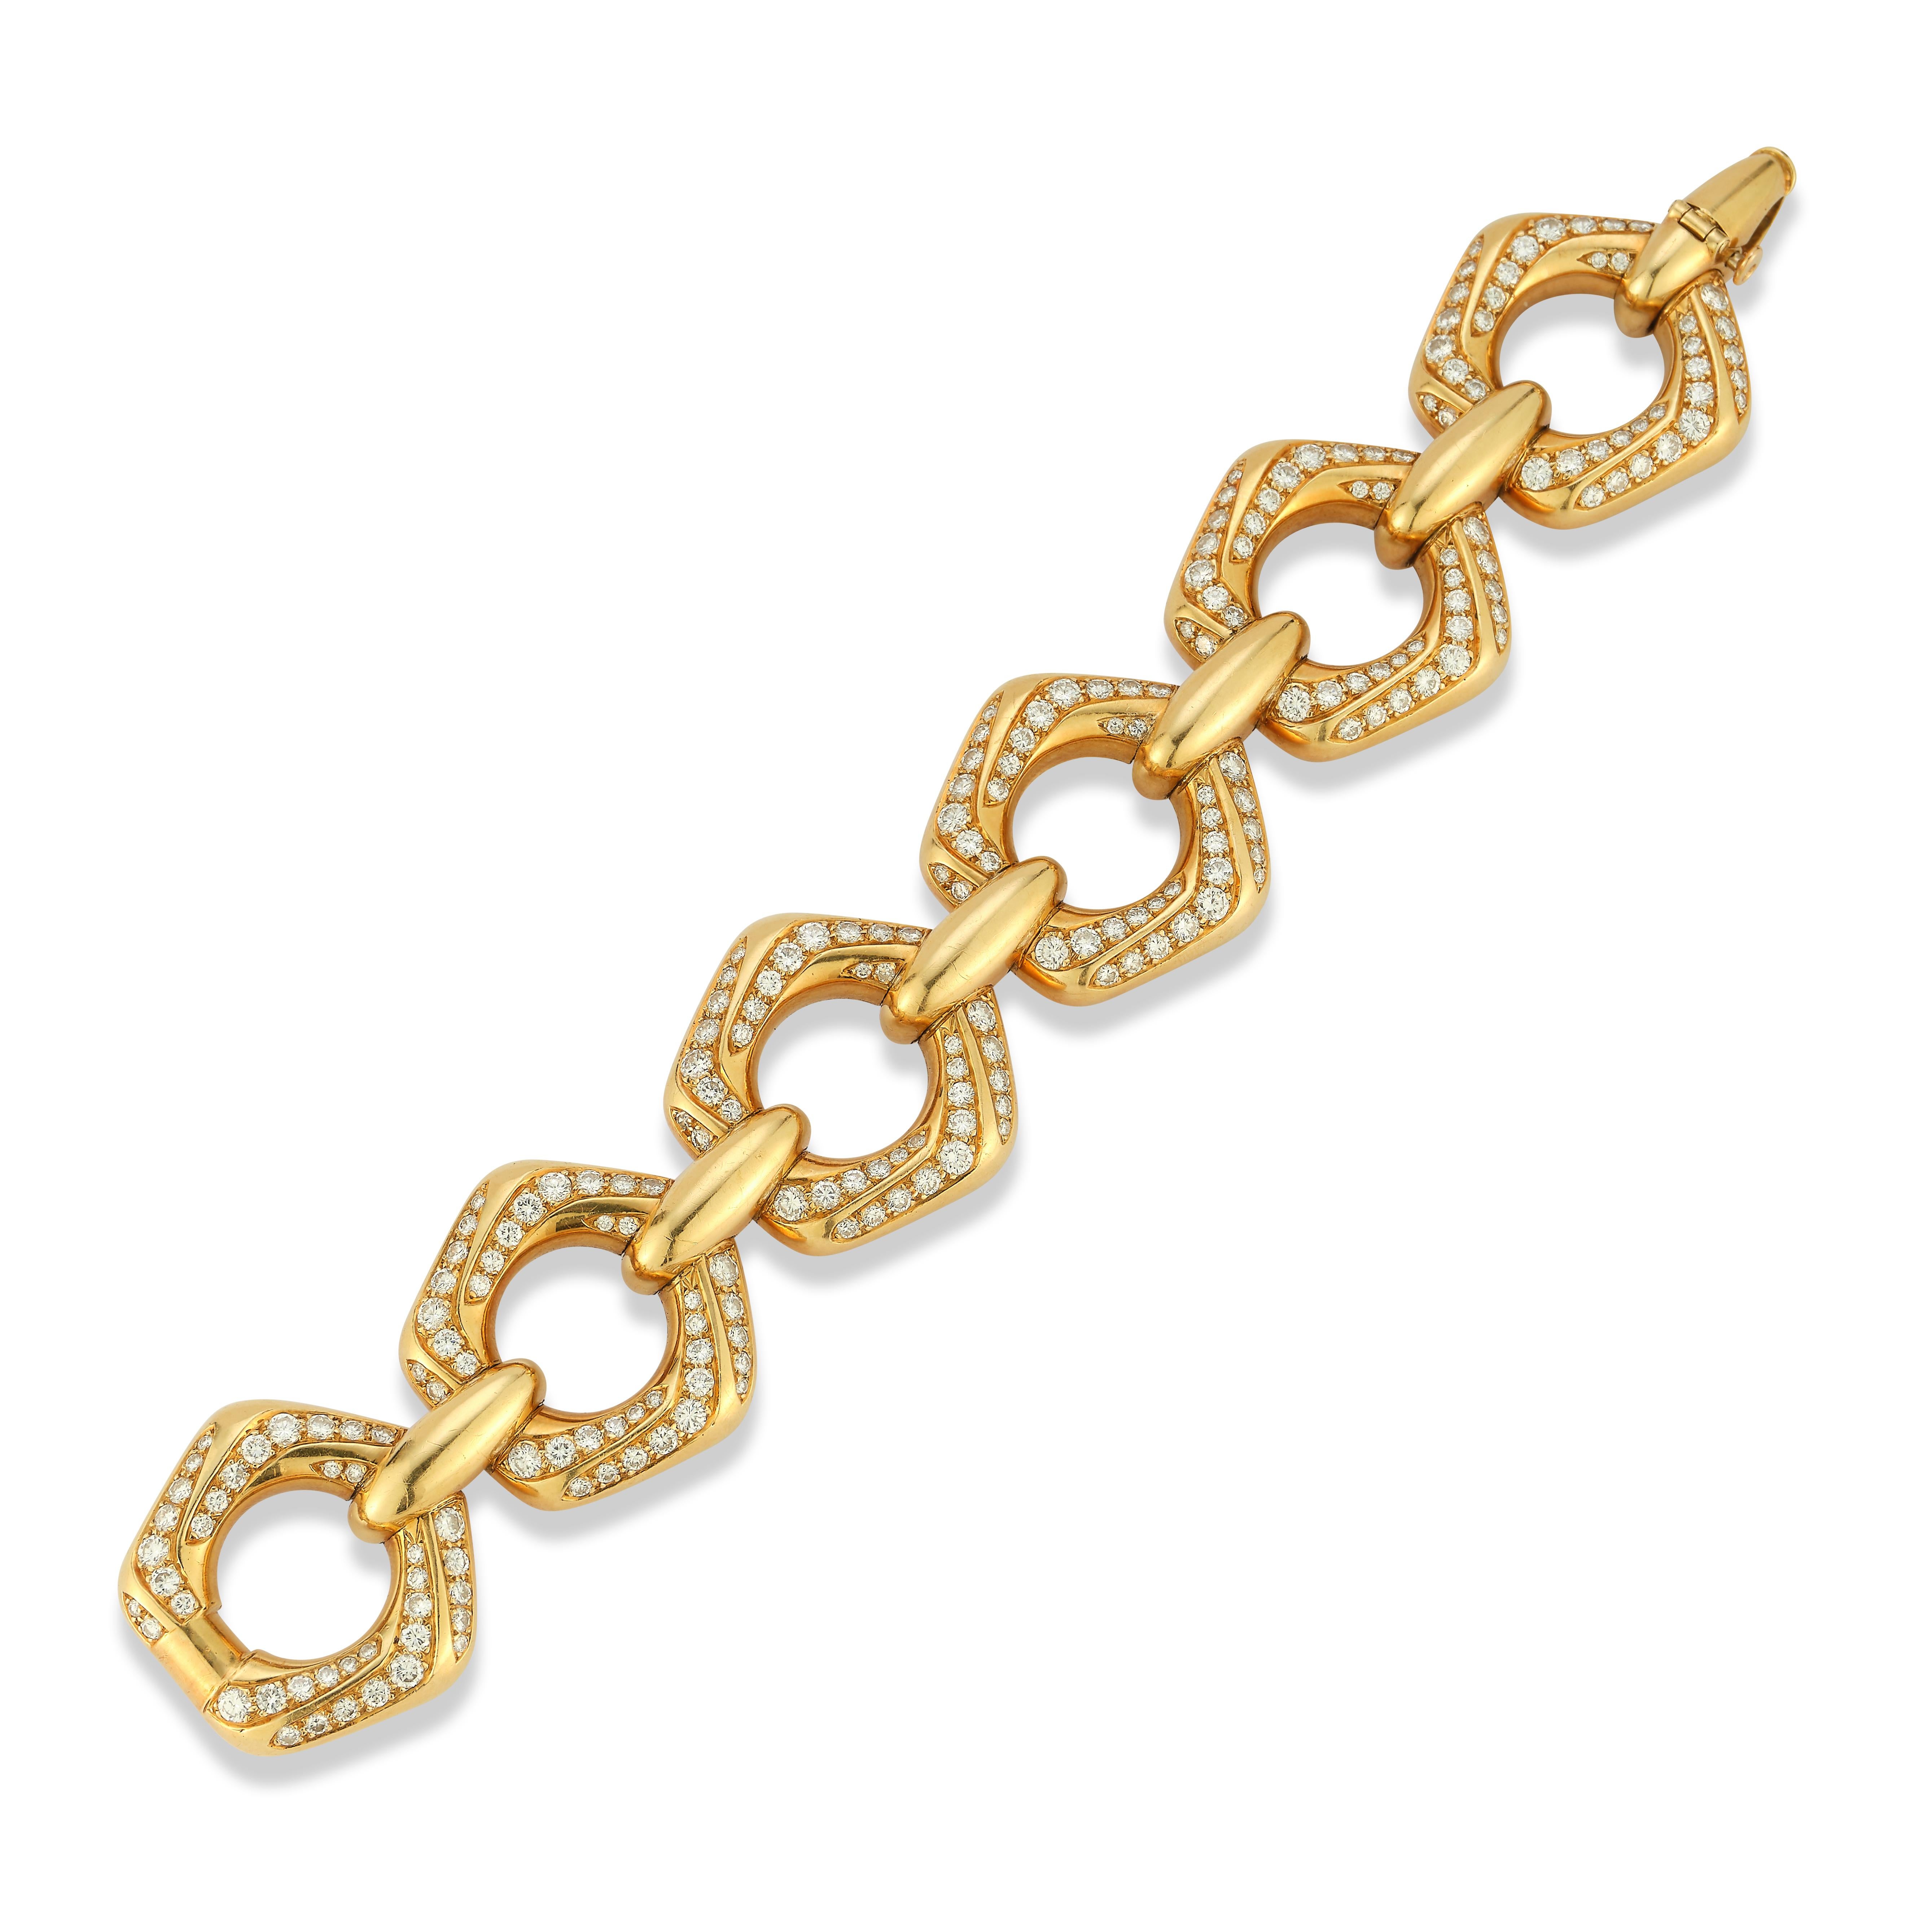 Van Cleef & Arpels Diamond Bracelet

An 18 karat gold bracelet set with 234 round diamonds weighing approximately 14 carats

Signed Van Cleef & Arpels and numbered
Stamped 750

Length 7